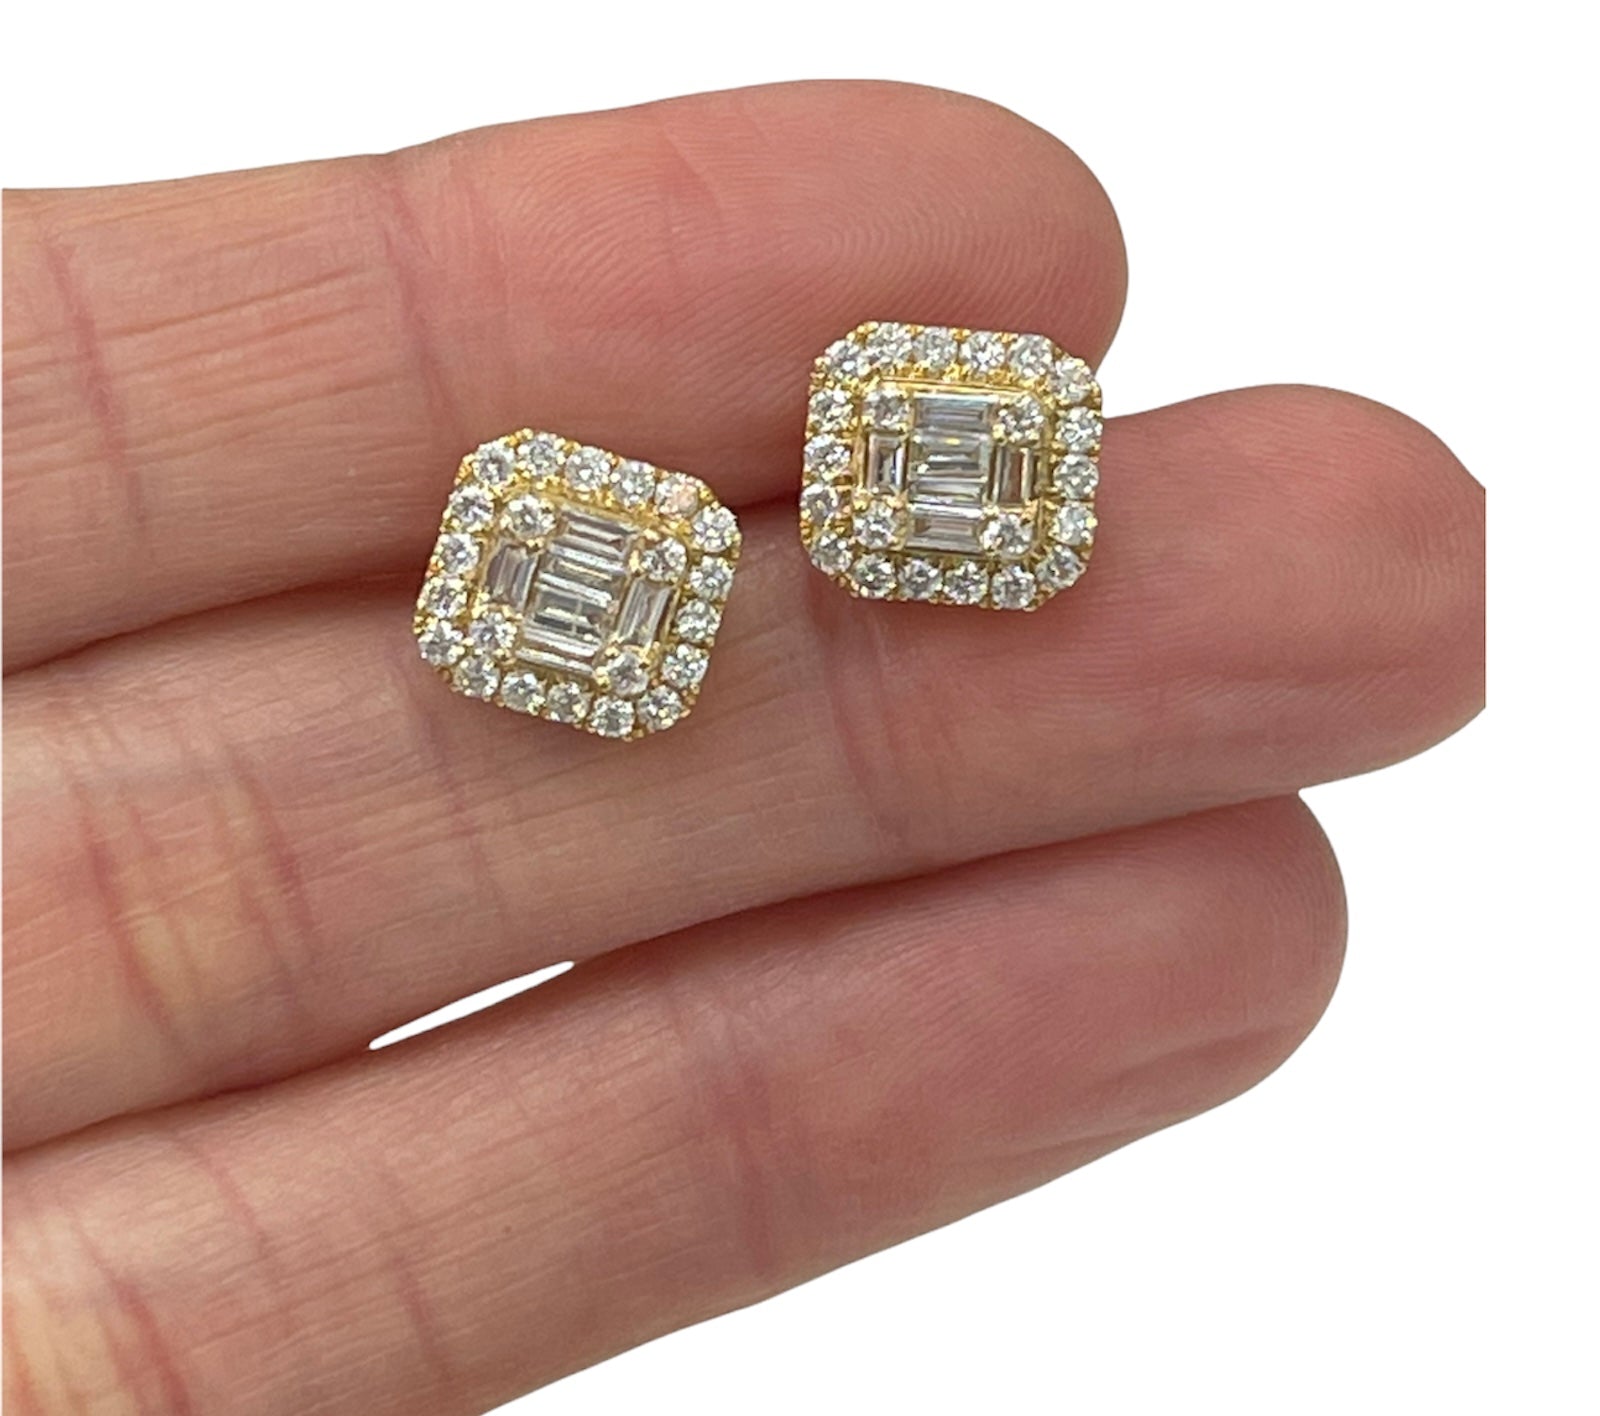 Baguettes Square Cluster Diamond Earrings Yellow Gold